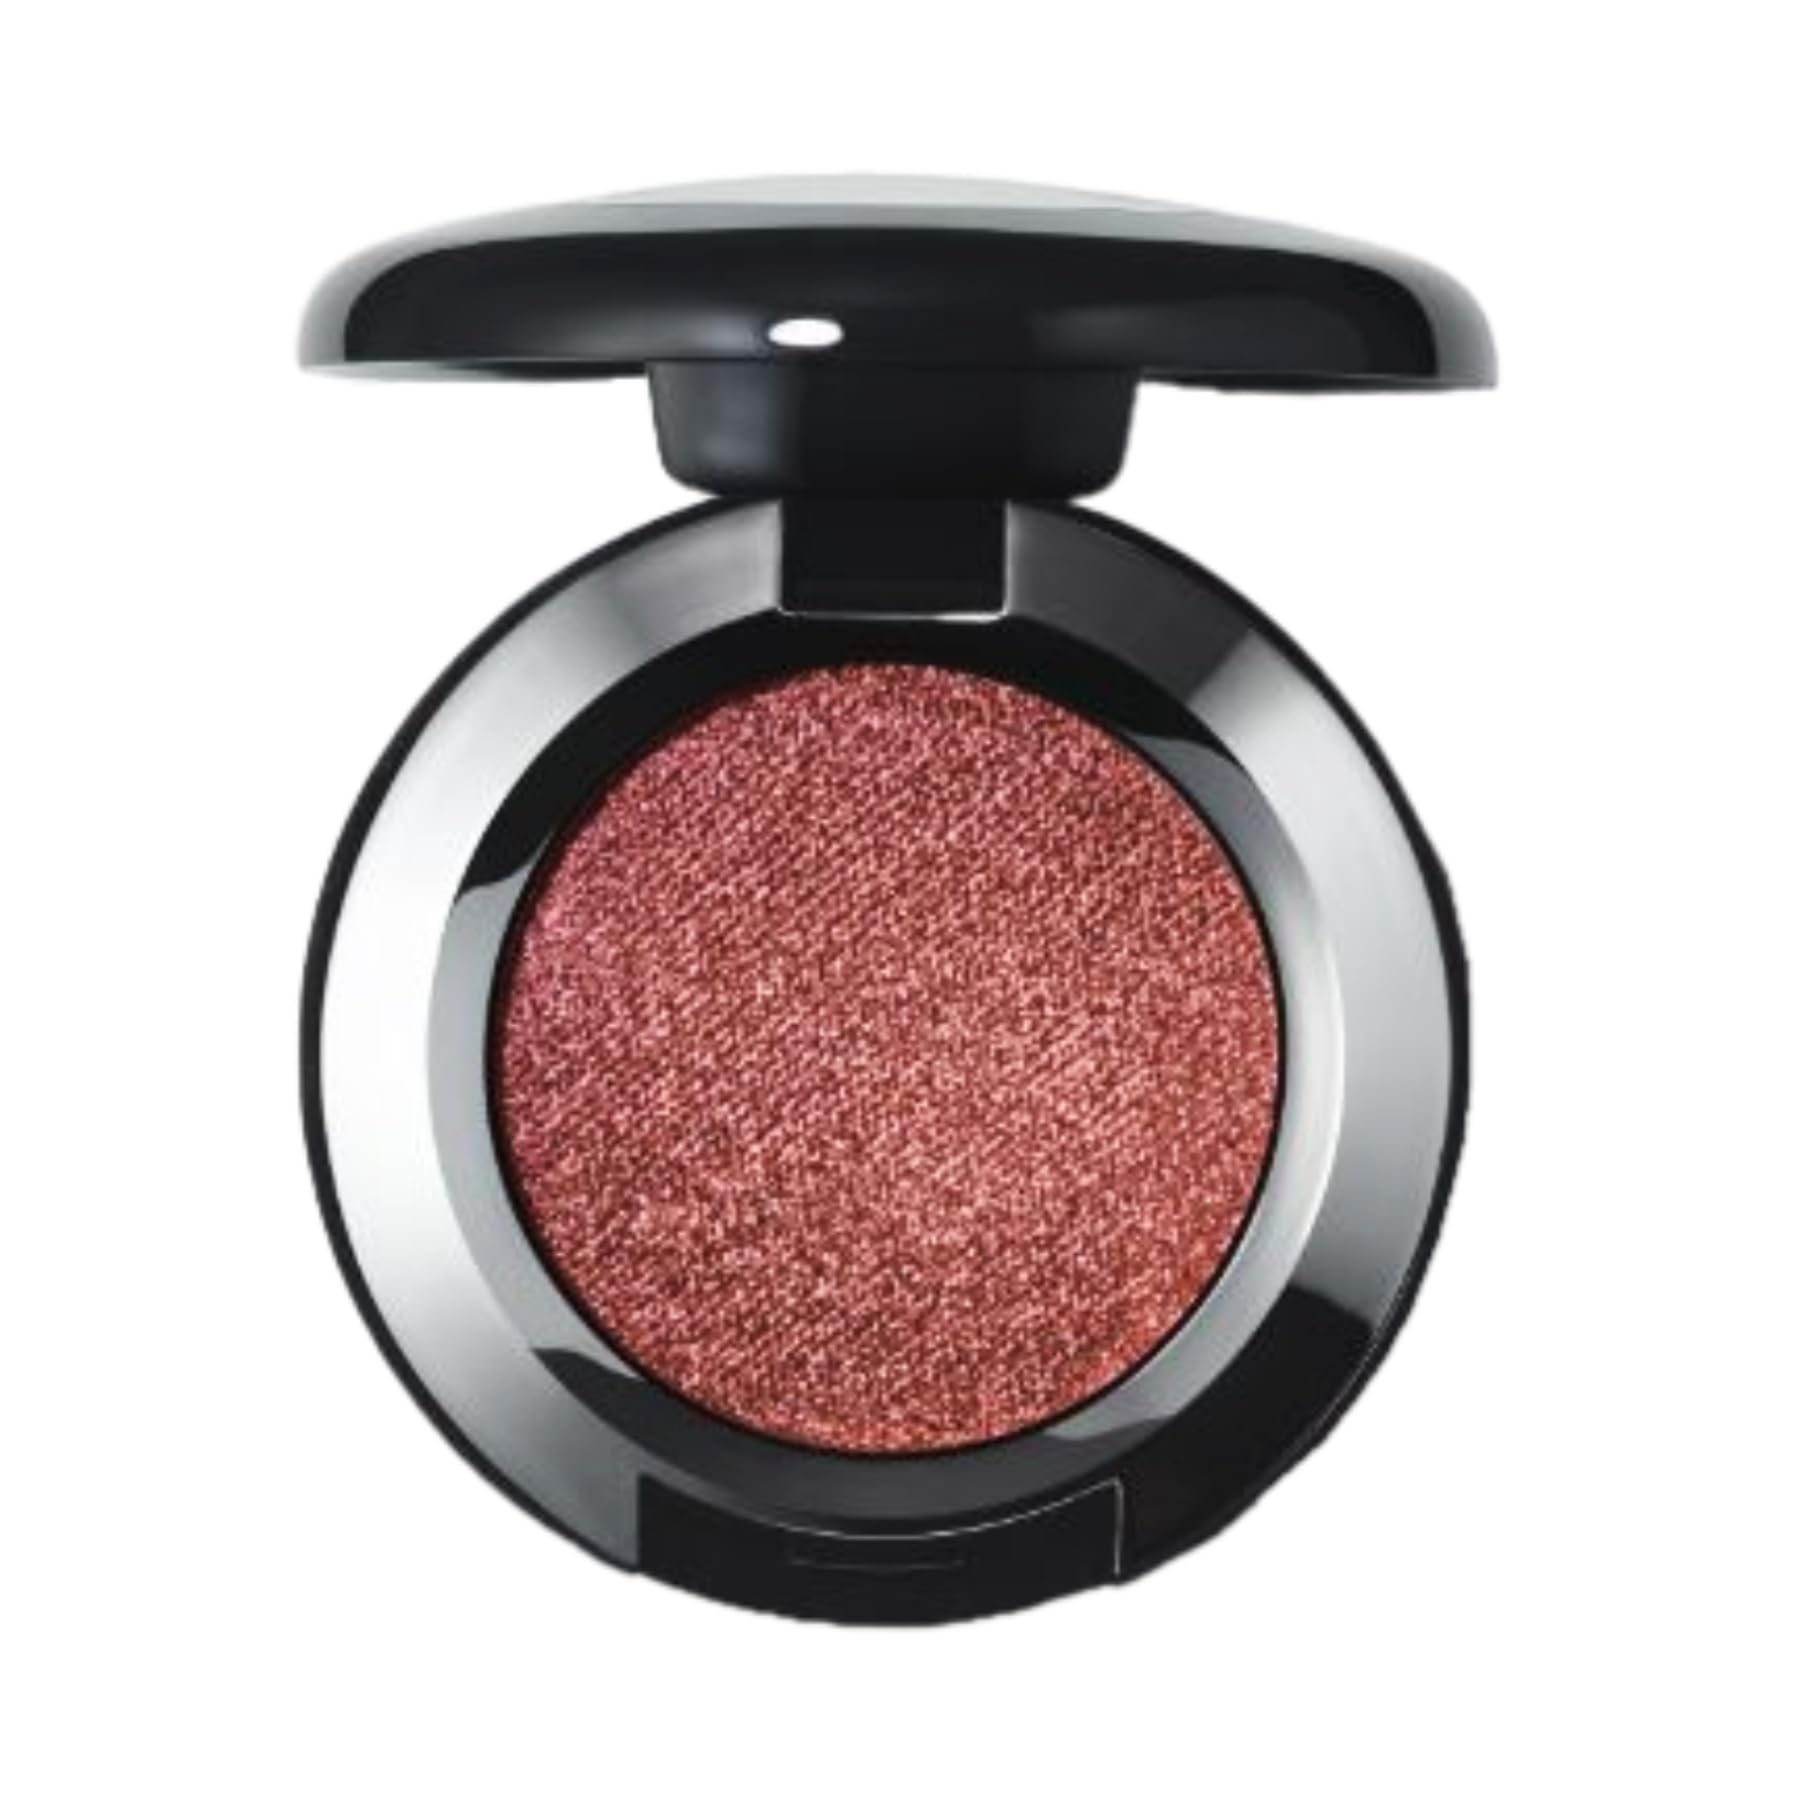 M.A.C. MAC Dazzleshadow Extreme Eyeshadow - INCINERATED (Brown with Red Pearl) - 0.05 oz / 1.5 g